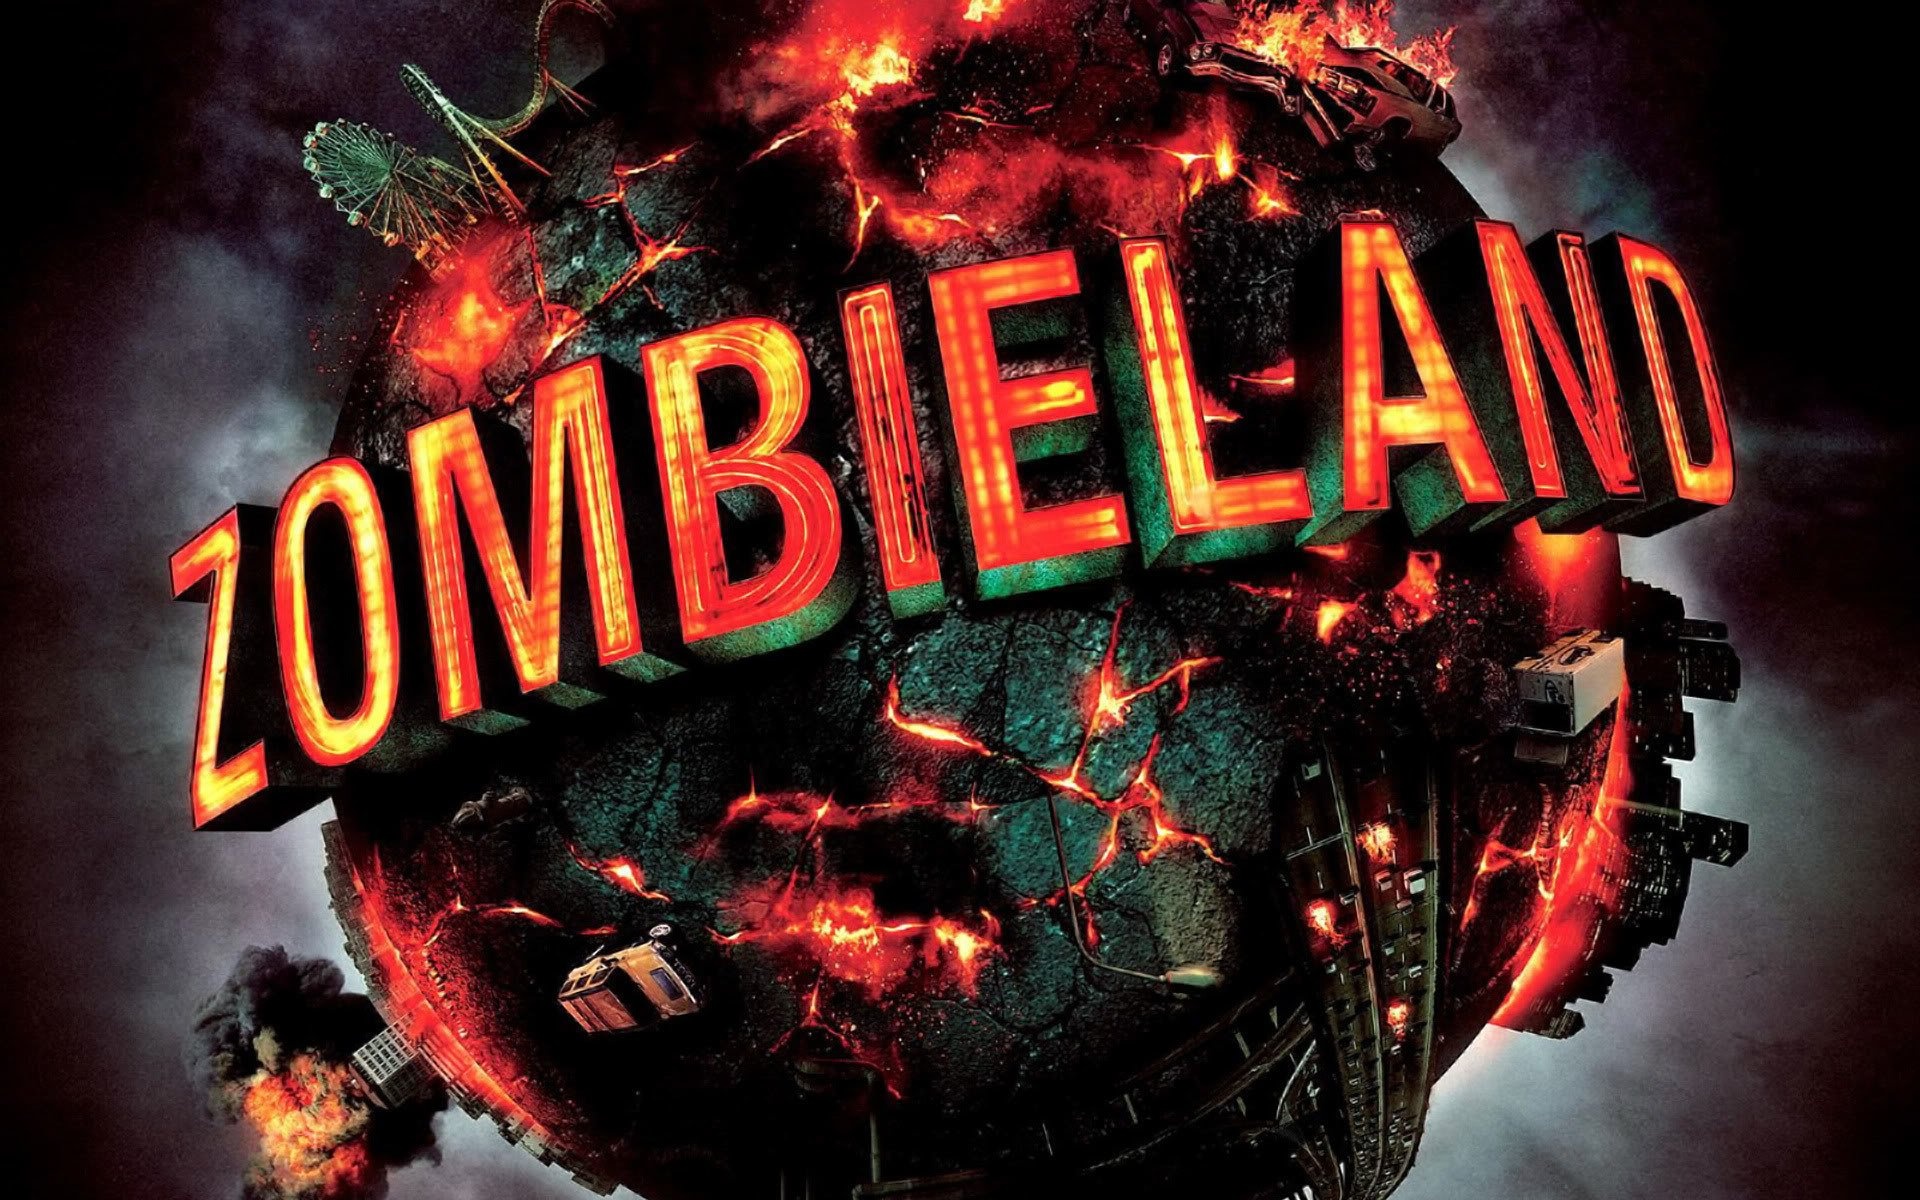 Zombieland: The film premiered at Fantastic Fest in Austin on September 25, 2009. 1920x1200 HD Background.